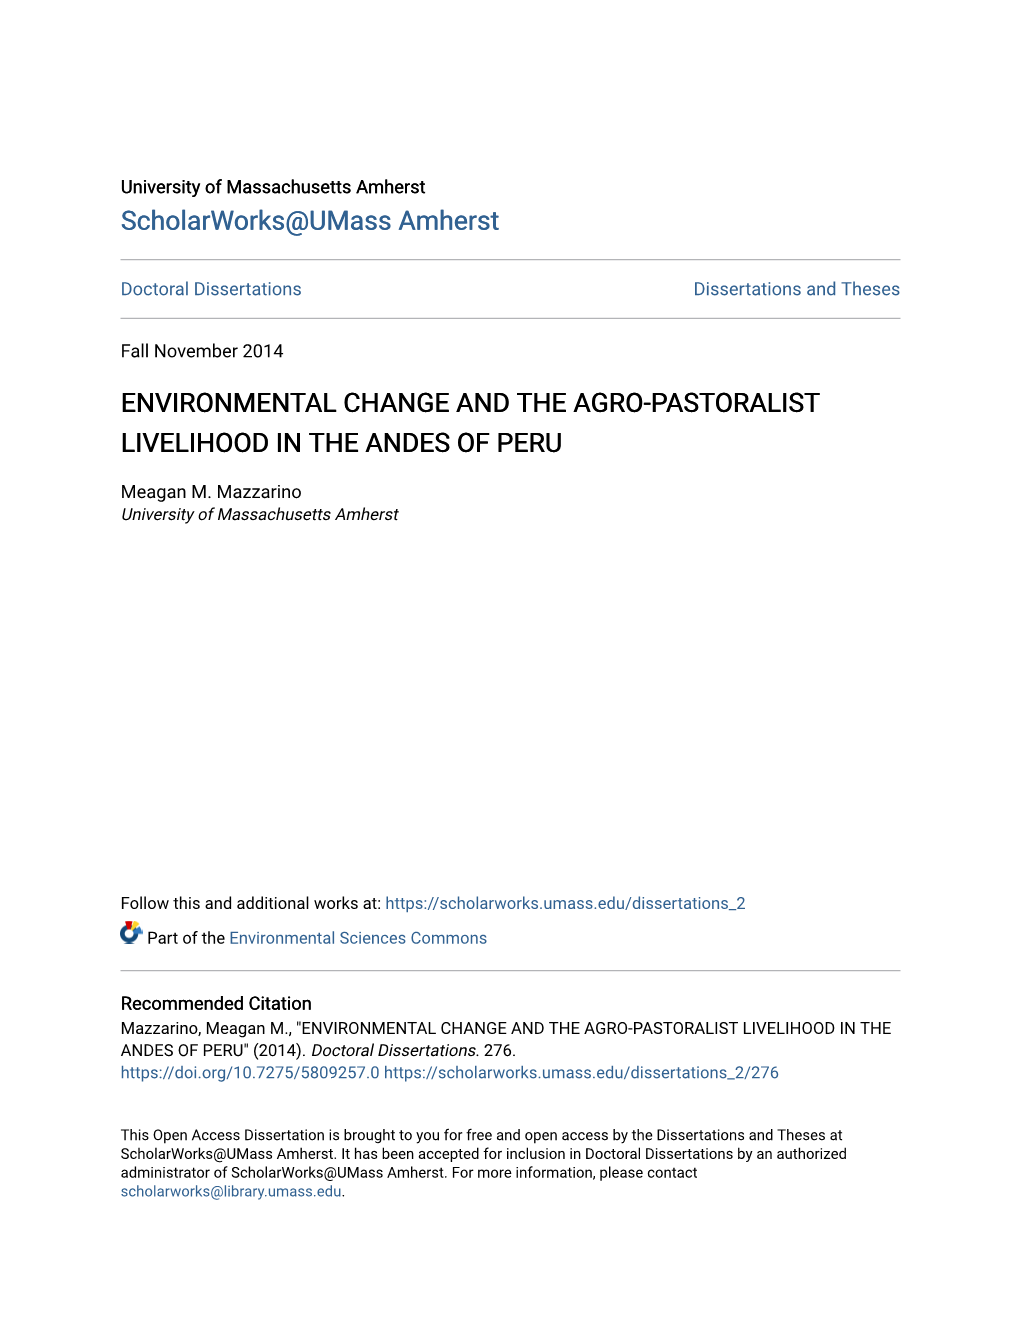 Environmental Change and the Agro-Pastoralist Livelihood in the Andes of Peru